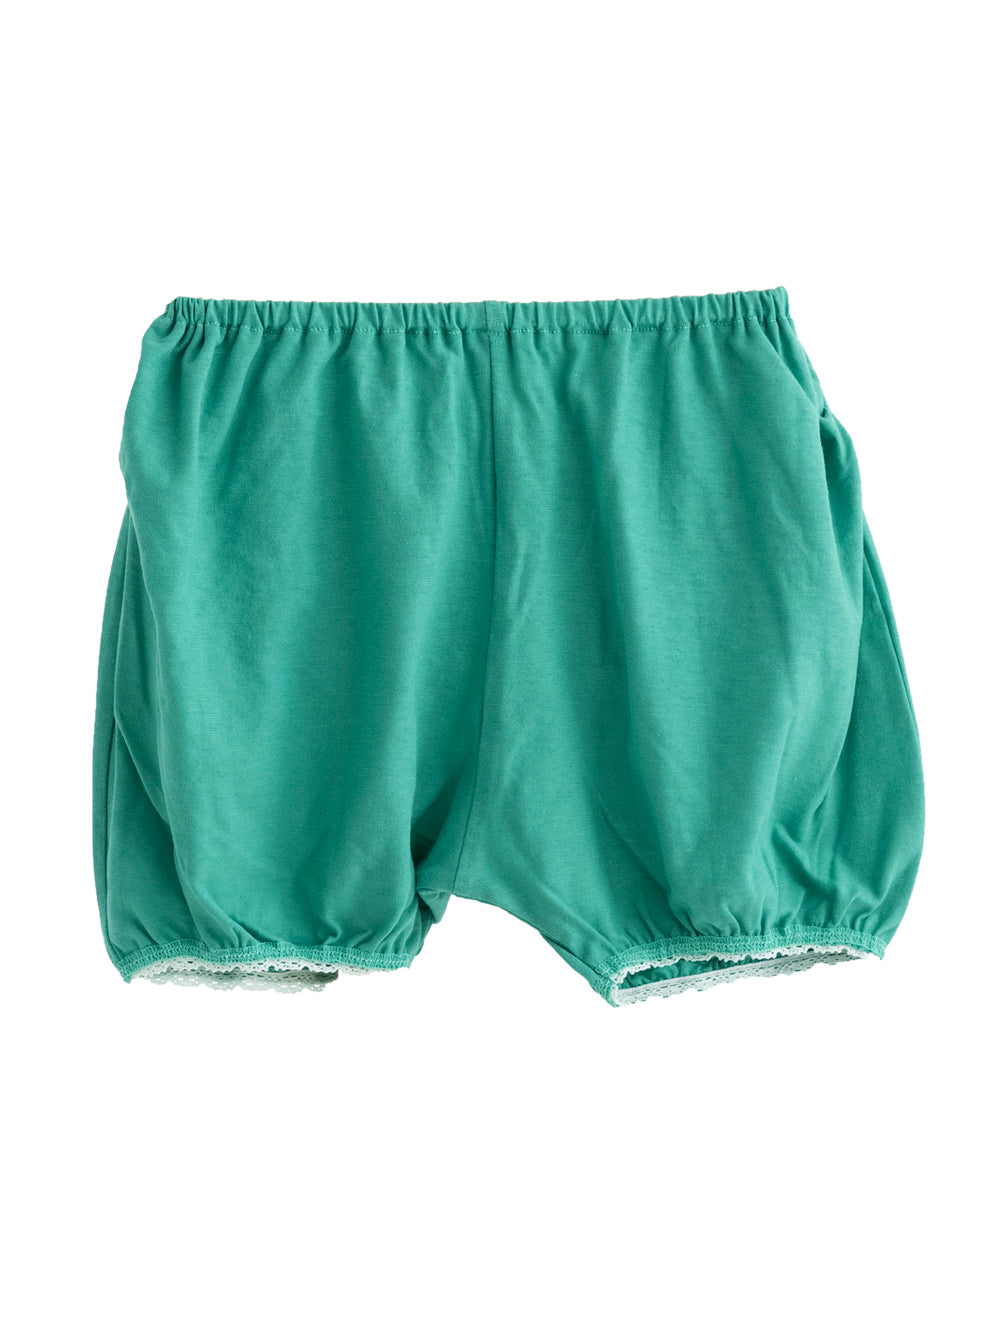 Melody Green Bloomers